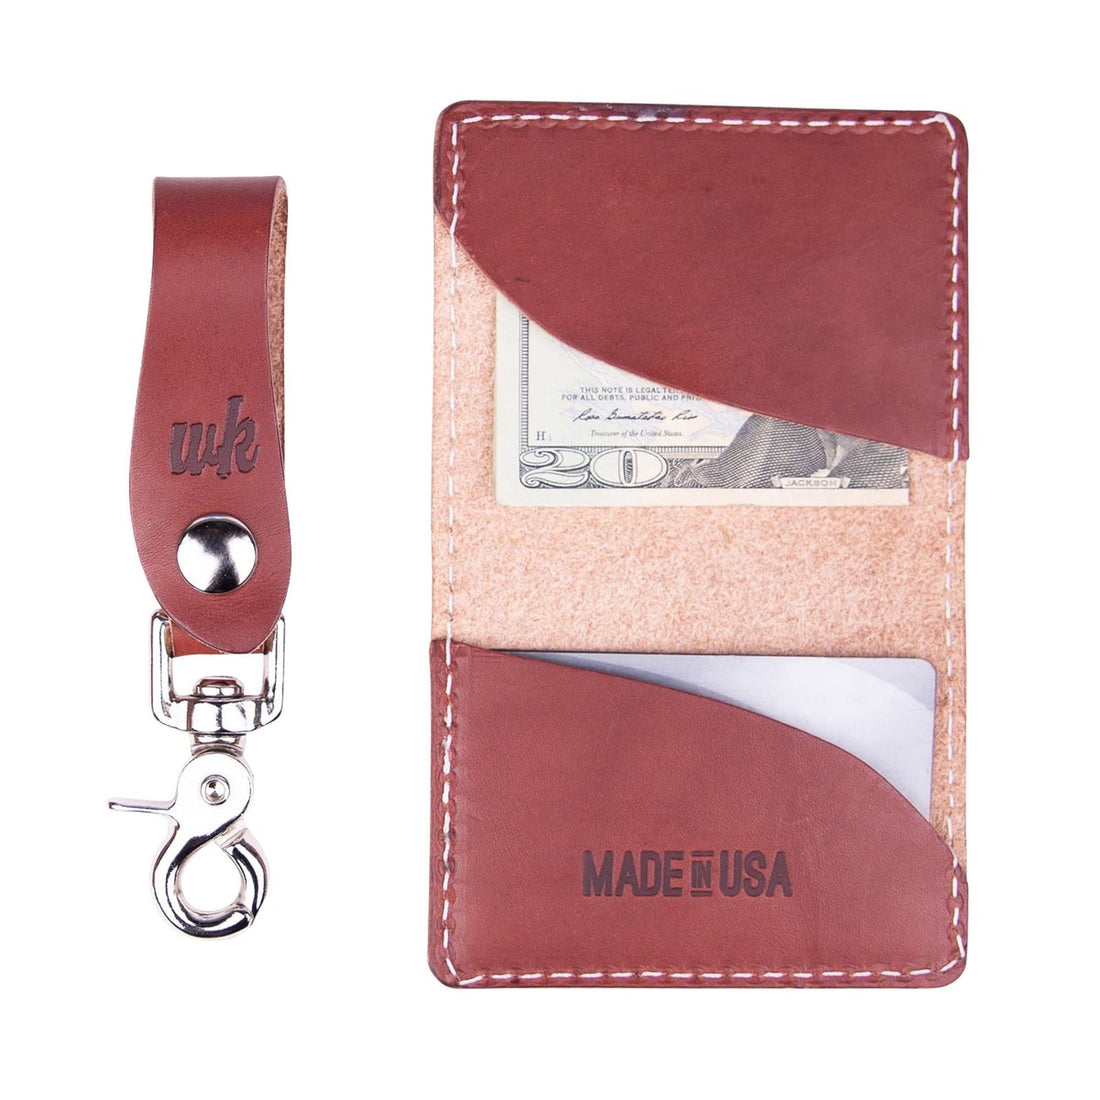 Made in the USA Spotlight: Men’s Leather Wallets